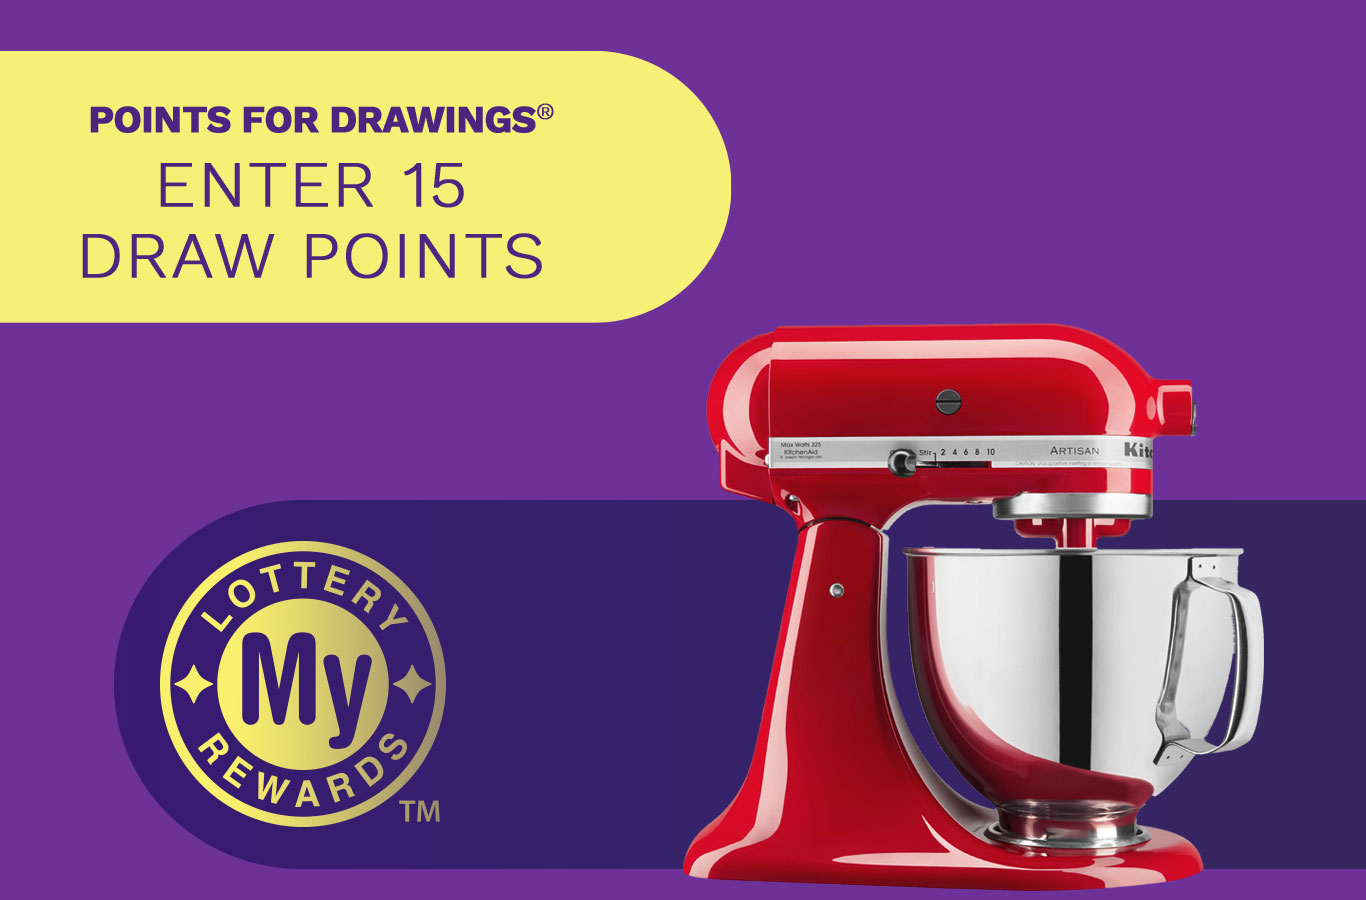 Here's your chance to win a KitchenAid® Stand Mixer! Enter by Monday, February 6th.